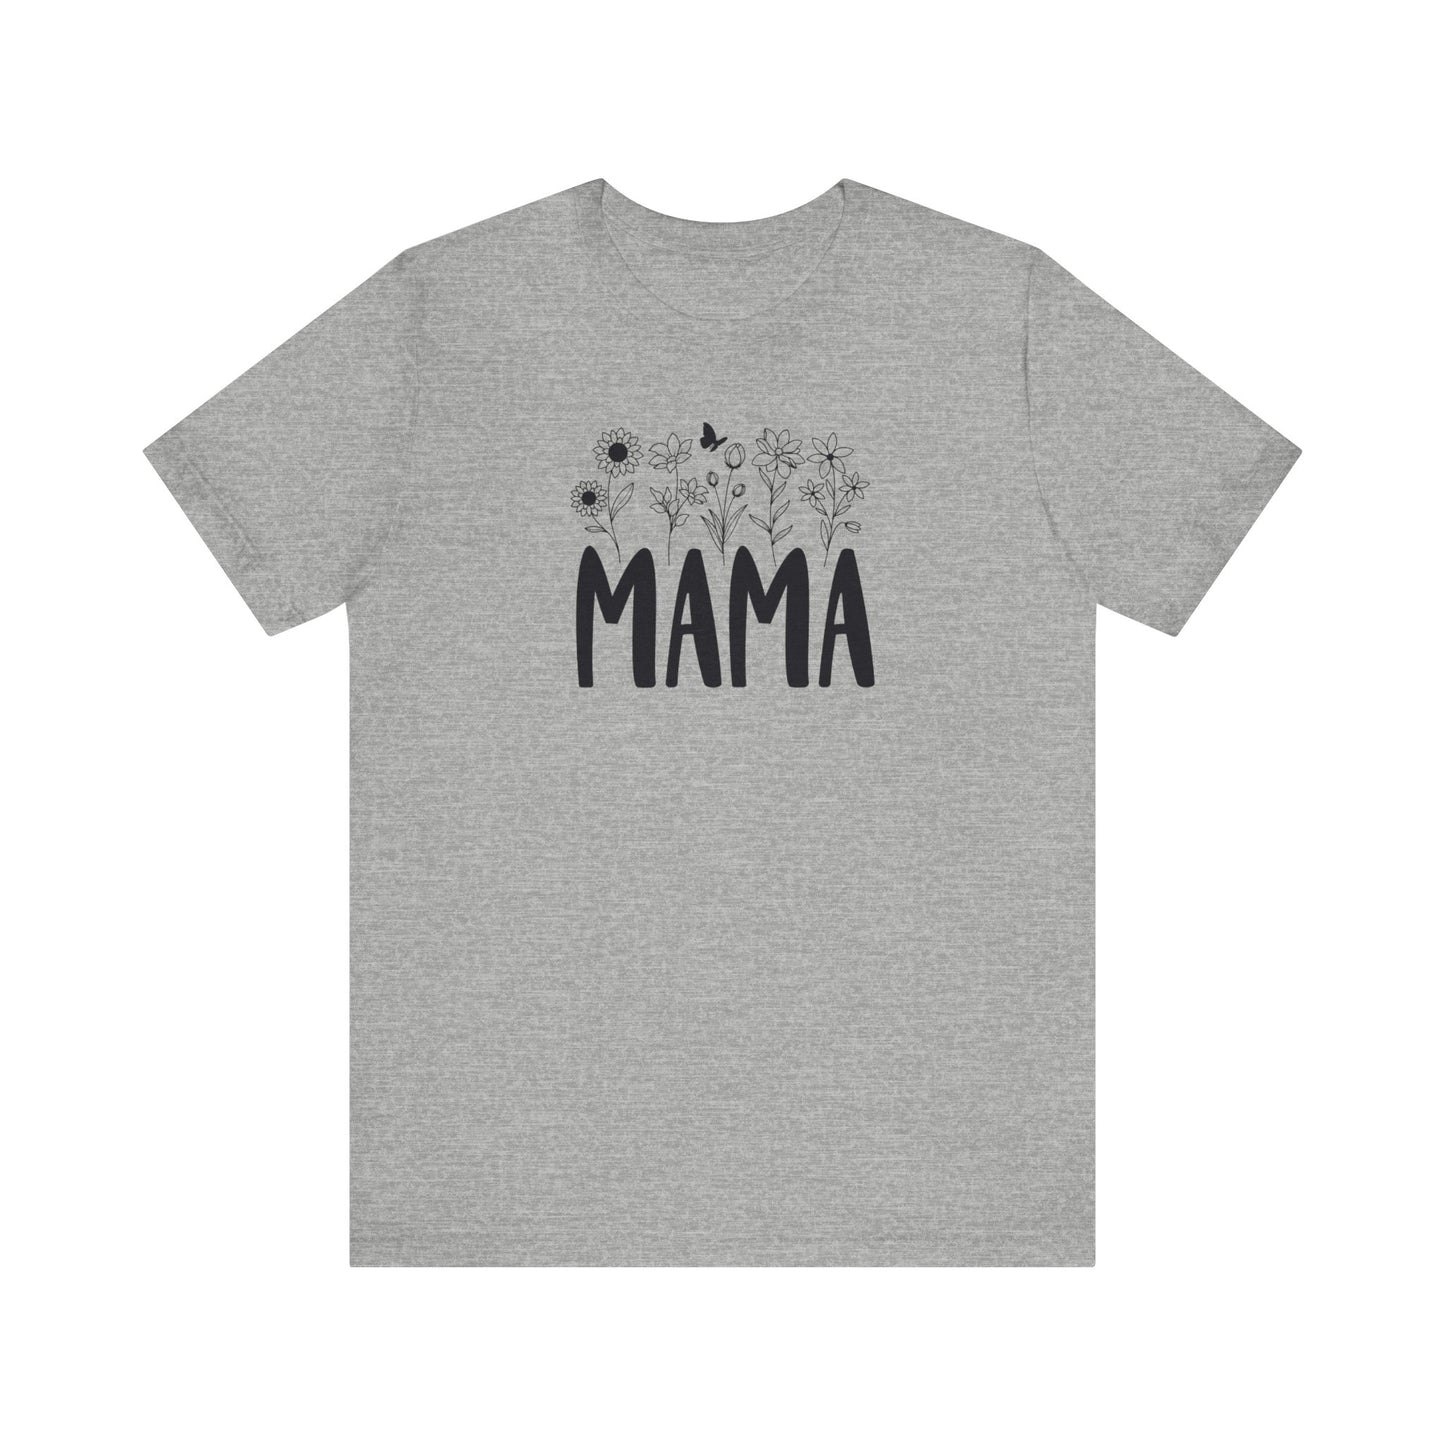 Mama Flowers Shirt, Mother's Day Gift, Mom Tee, Mama Floral Tshirt (Mom-40)